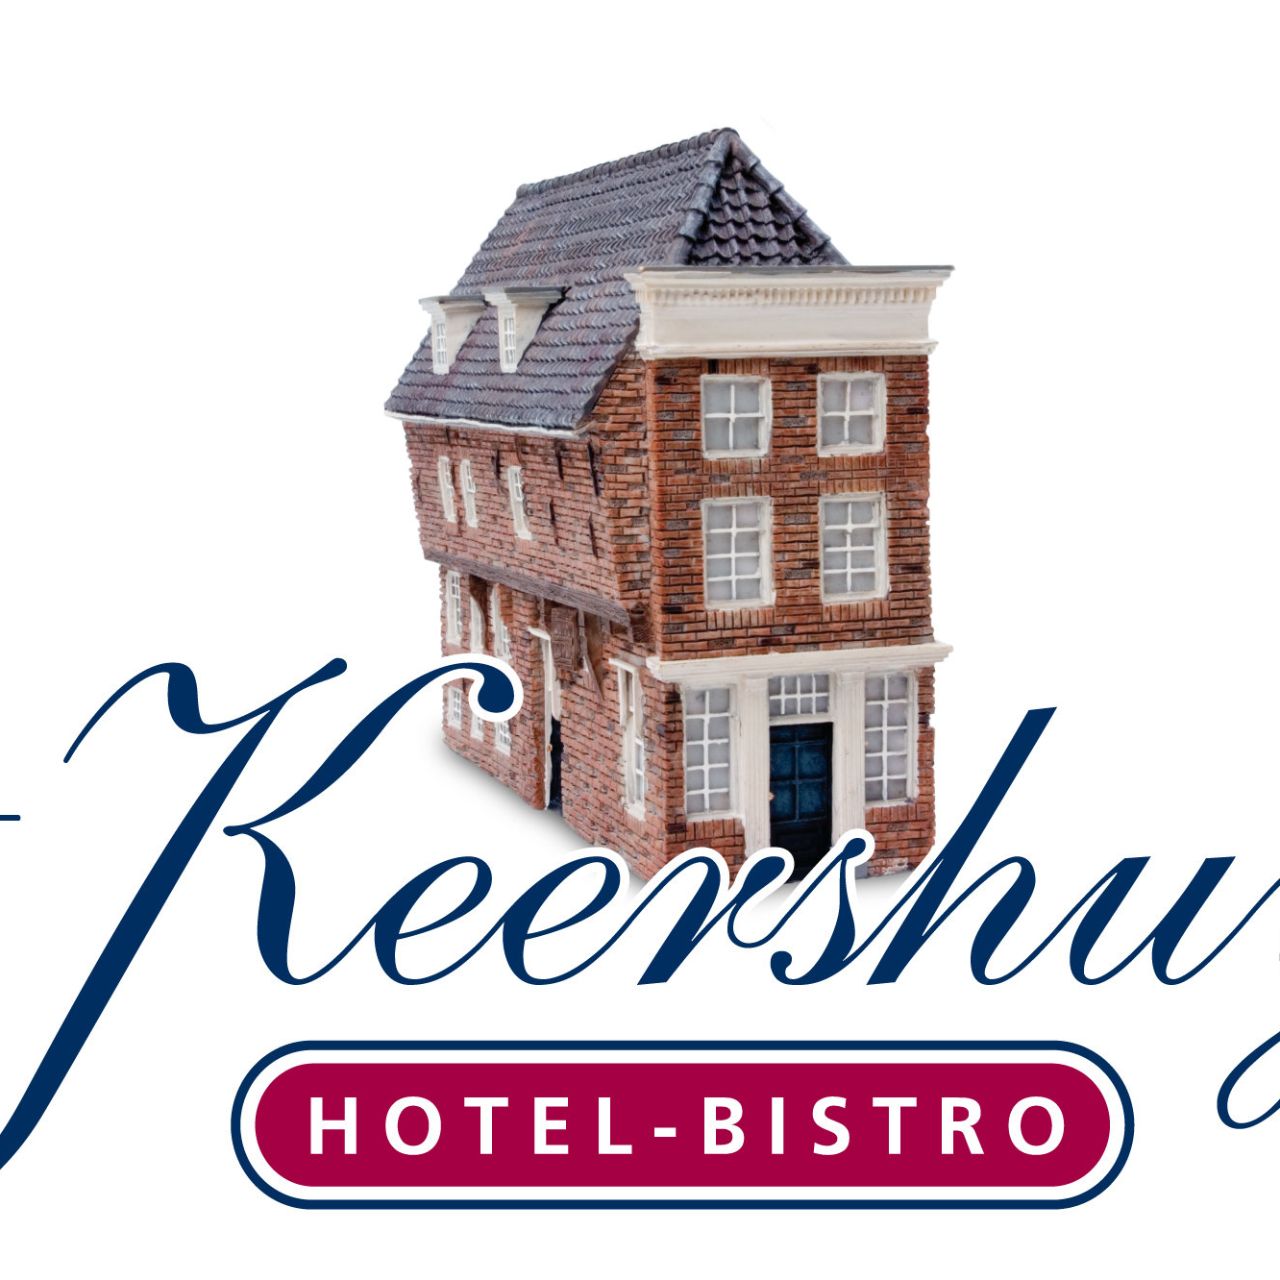 Hotel 't Keershuys - 's-Hertogenbosch - Great prices at HOTEL INFO